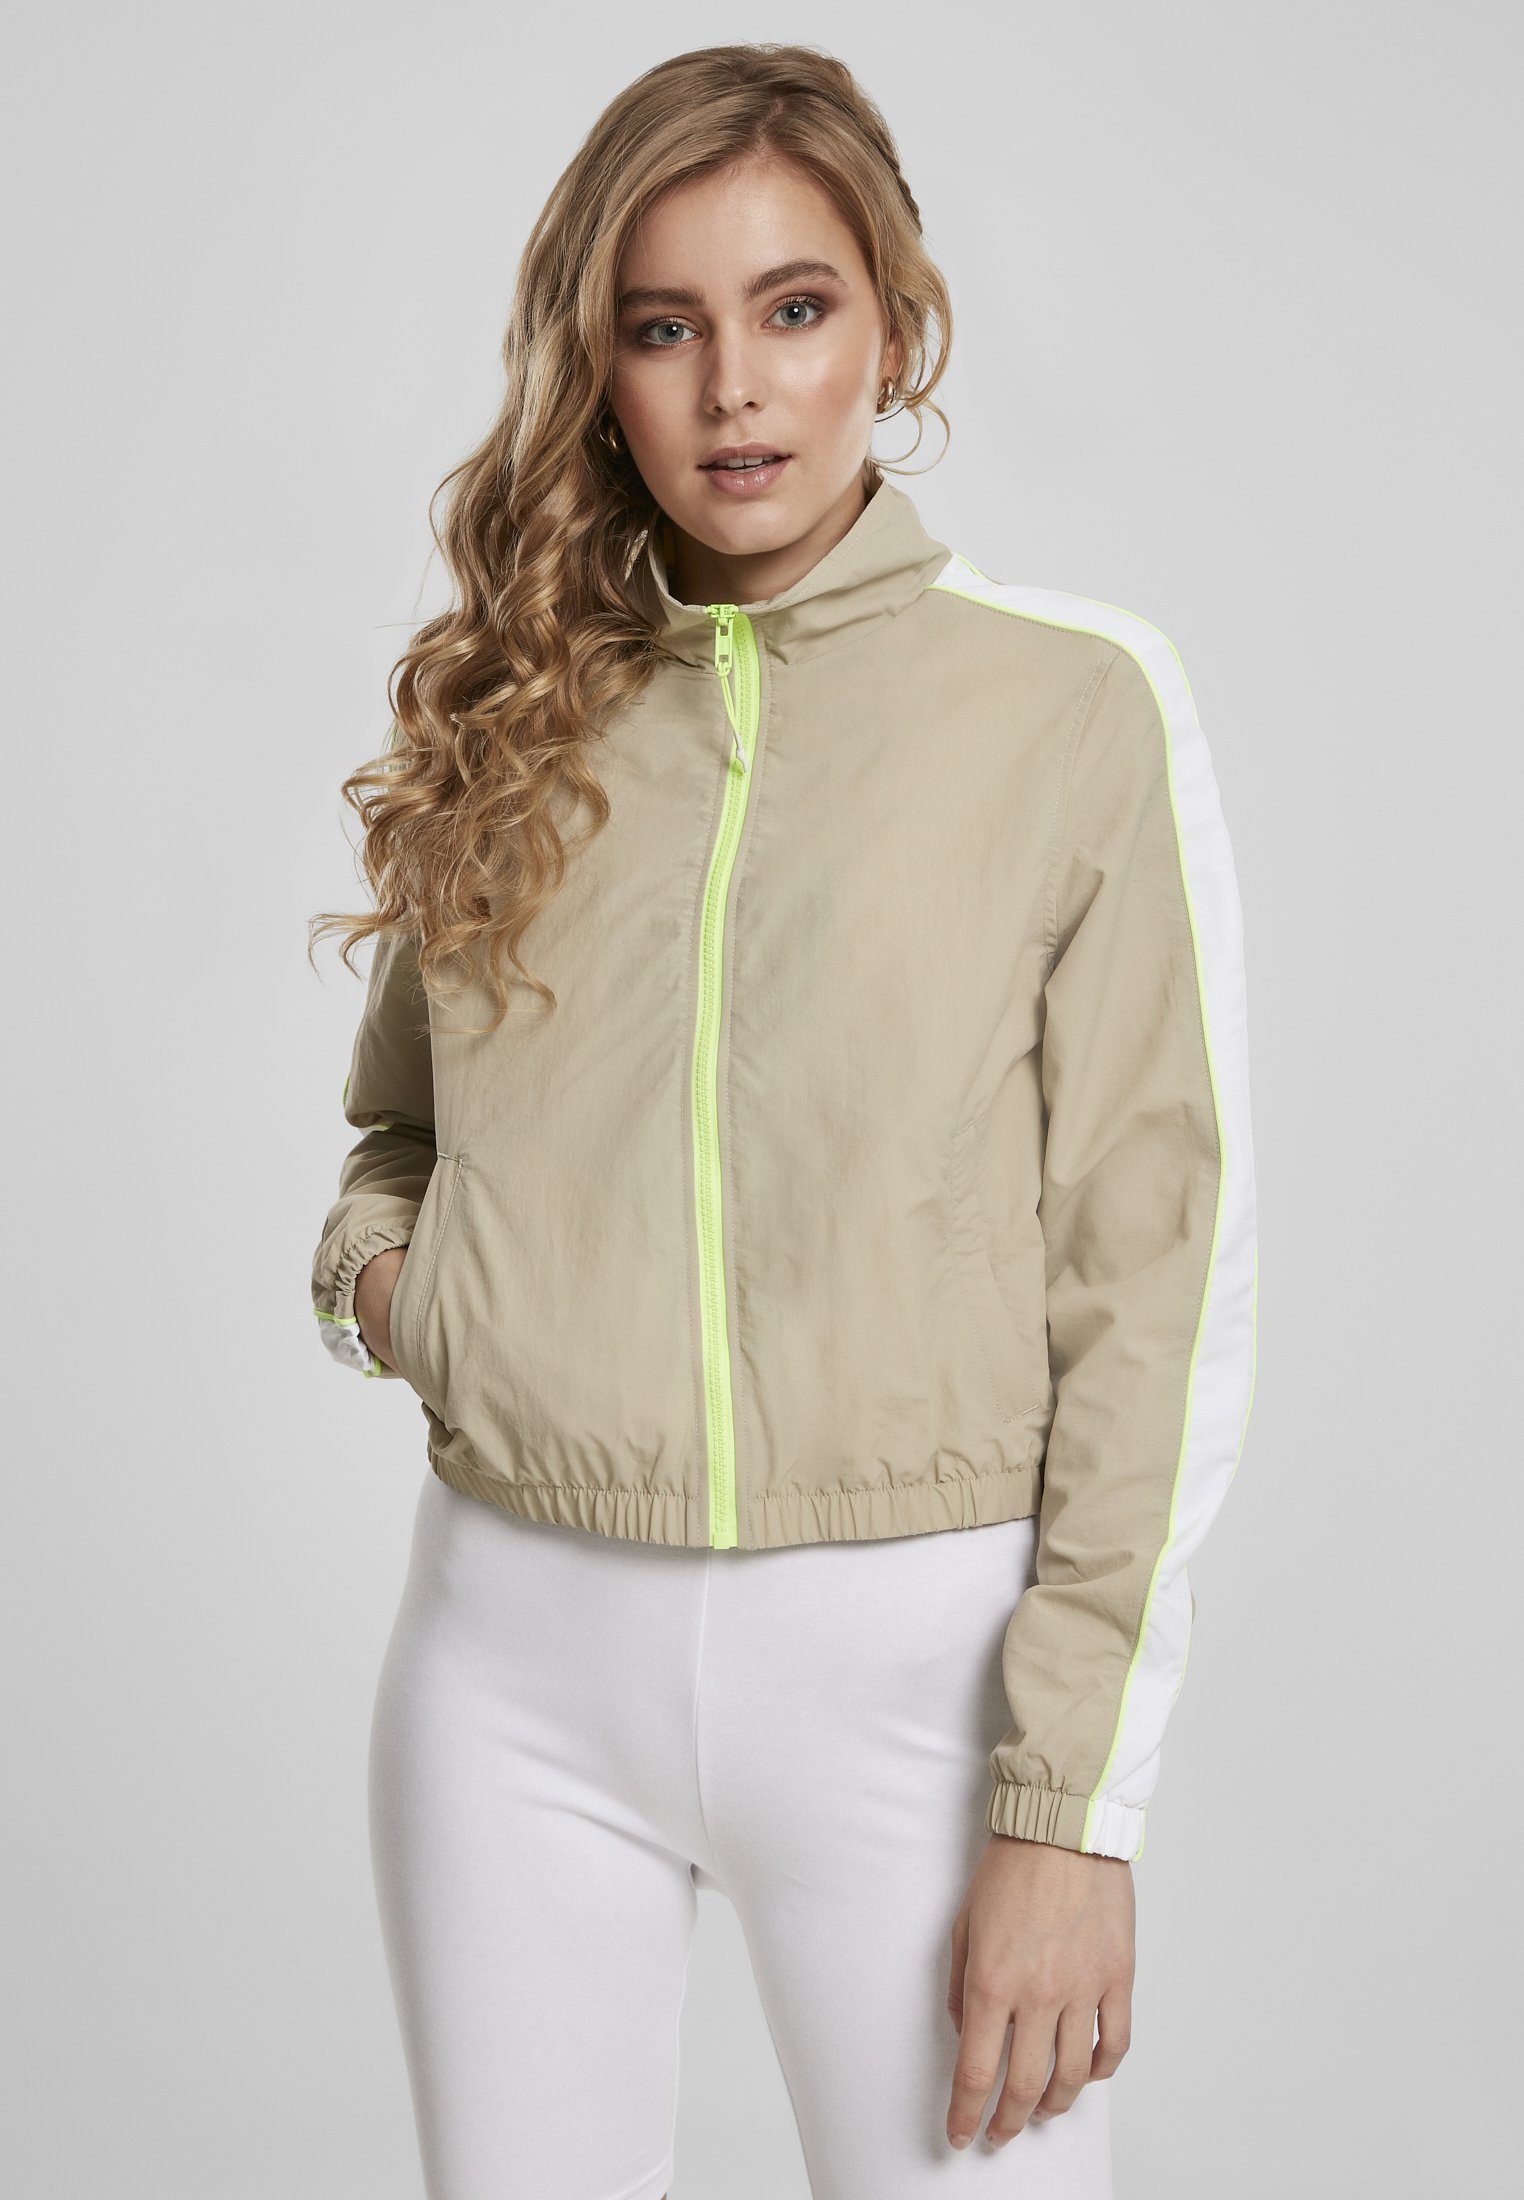 URBAN CLASSICS Outdoorjacke Damen Ladies Short Piped Track Jacket (1-St) concrete/electriclime